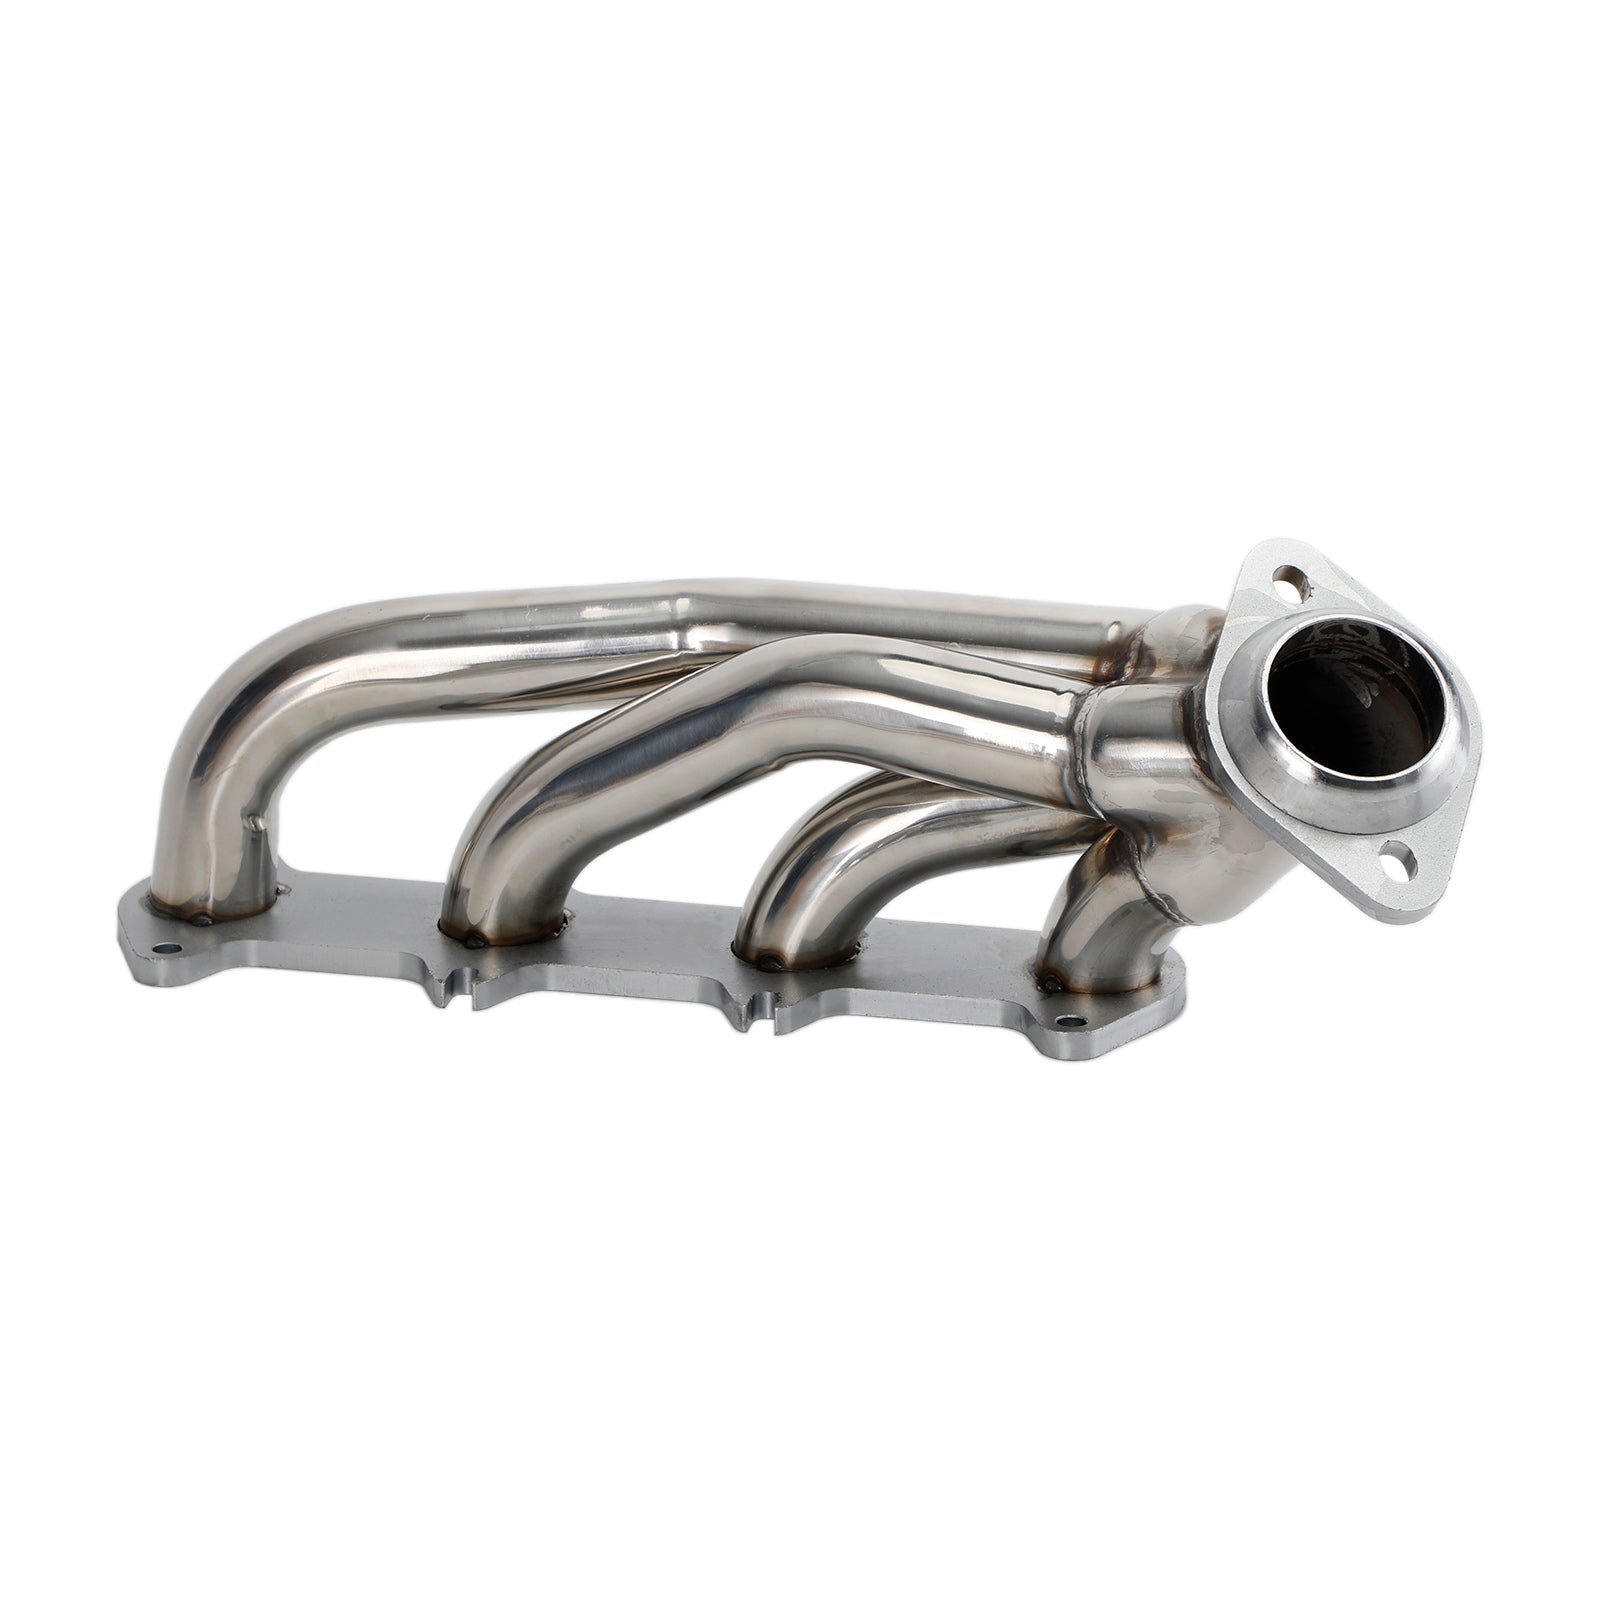 Ford 2004-2010 F150 5.4 V8 Stainless Exhaust Manifold Shorty Headers Performance